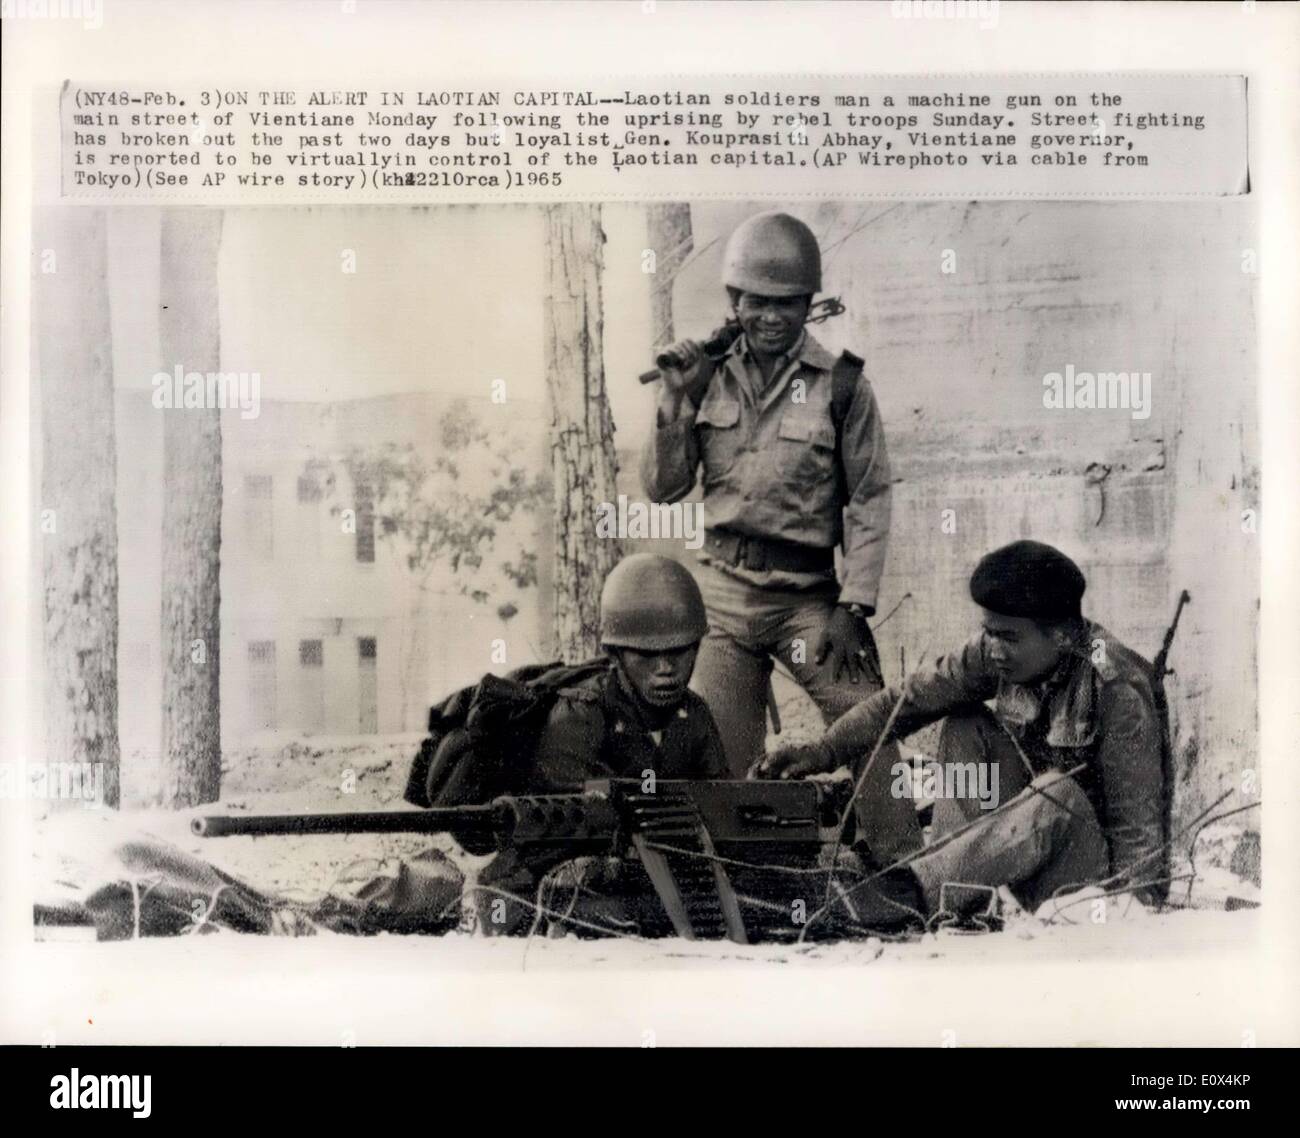 Feb. 03, 1965 - On the Alert in Laotian Capital -- Laotian soldiers man a machine gun on the main street of Vietiane Monday following the uprising by rebel troops Sunday. Street fight has broken out the past two days but loyalist Gen. Kouprasith Abhay, Vietiane governor is reported to be virtyually in control of then Laotian capital. (AP wirephoto via cable from Tokya) (see AP Wire story) (kh2210rea)1965. Stock Photo